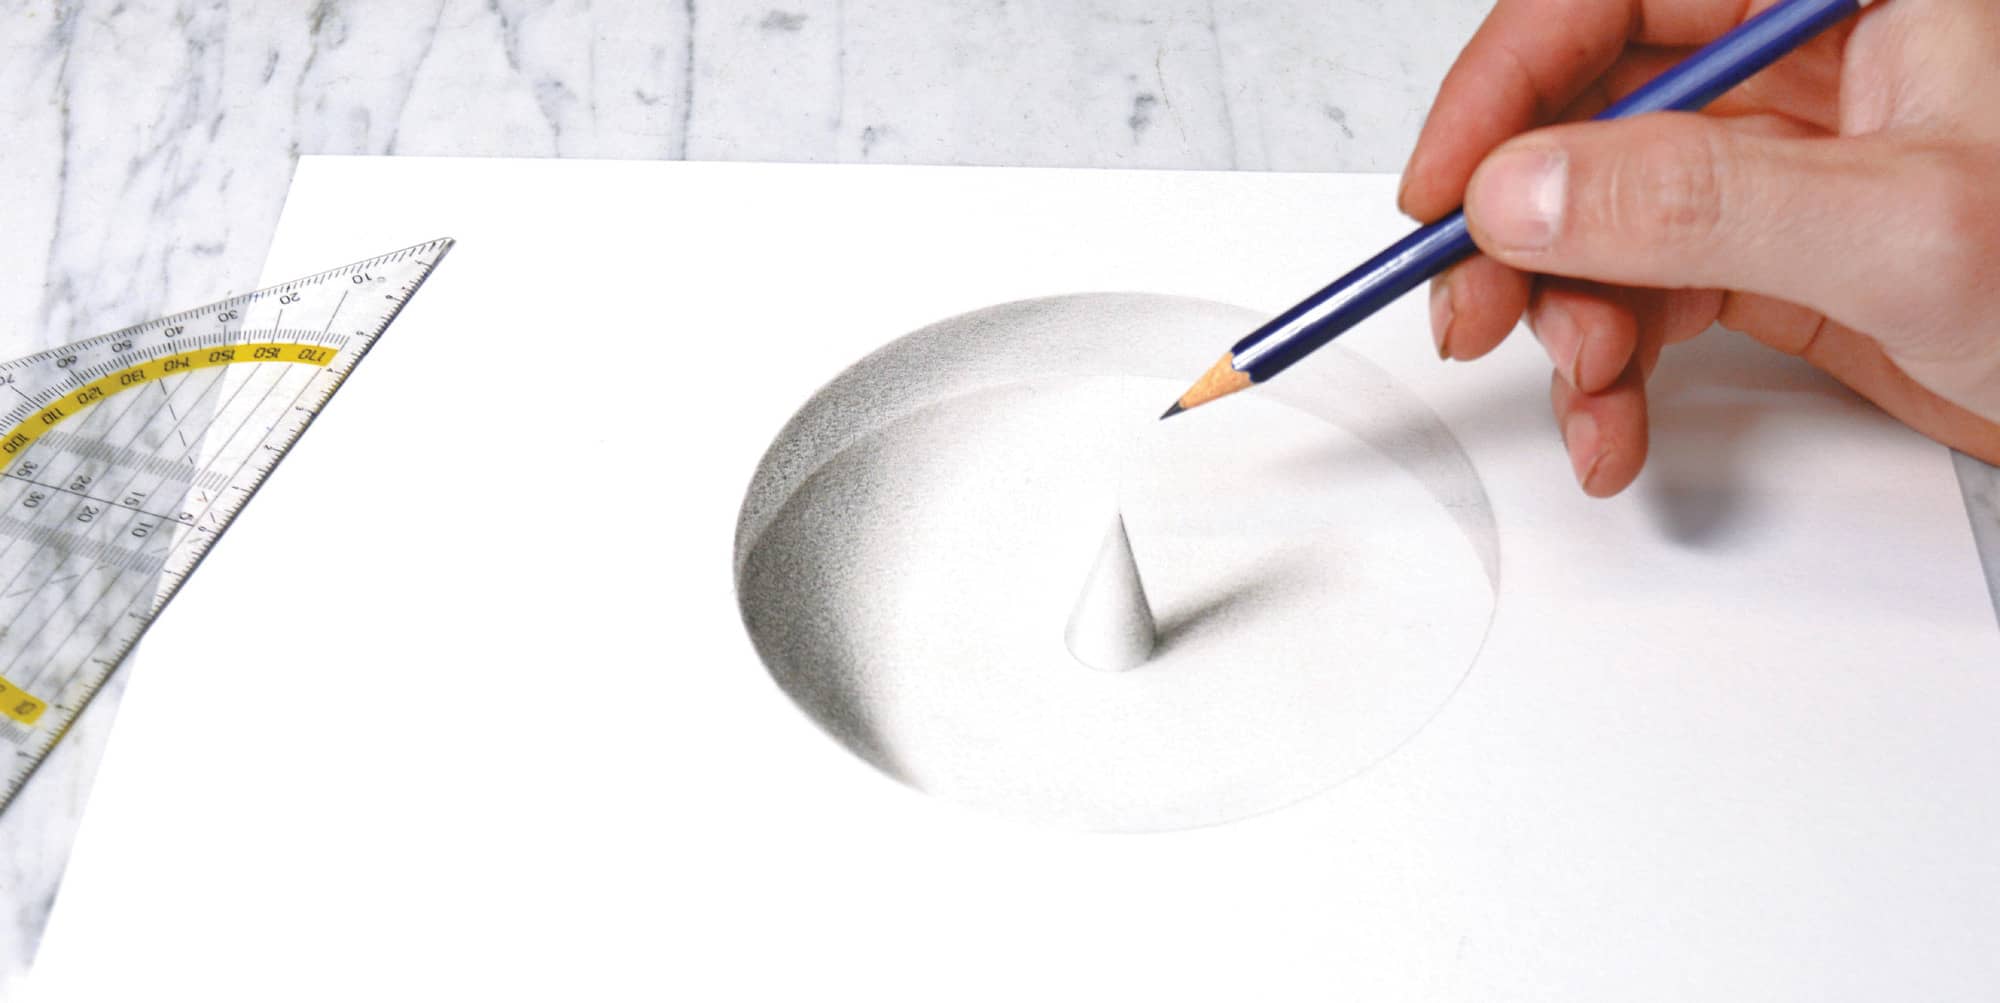 What are some of the best 3D sketches of yours? - Quora